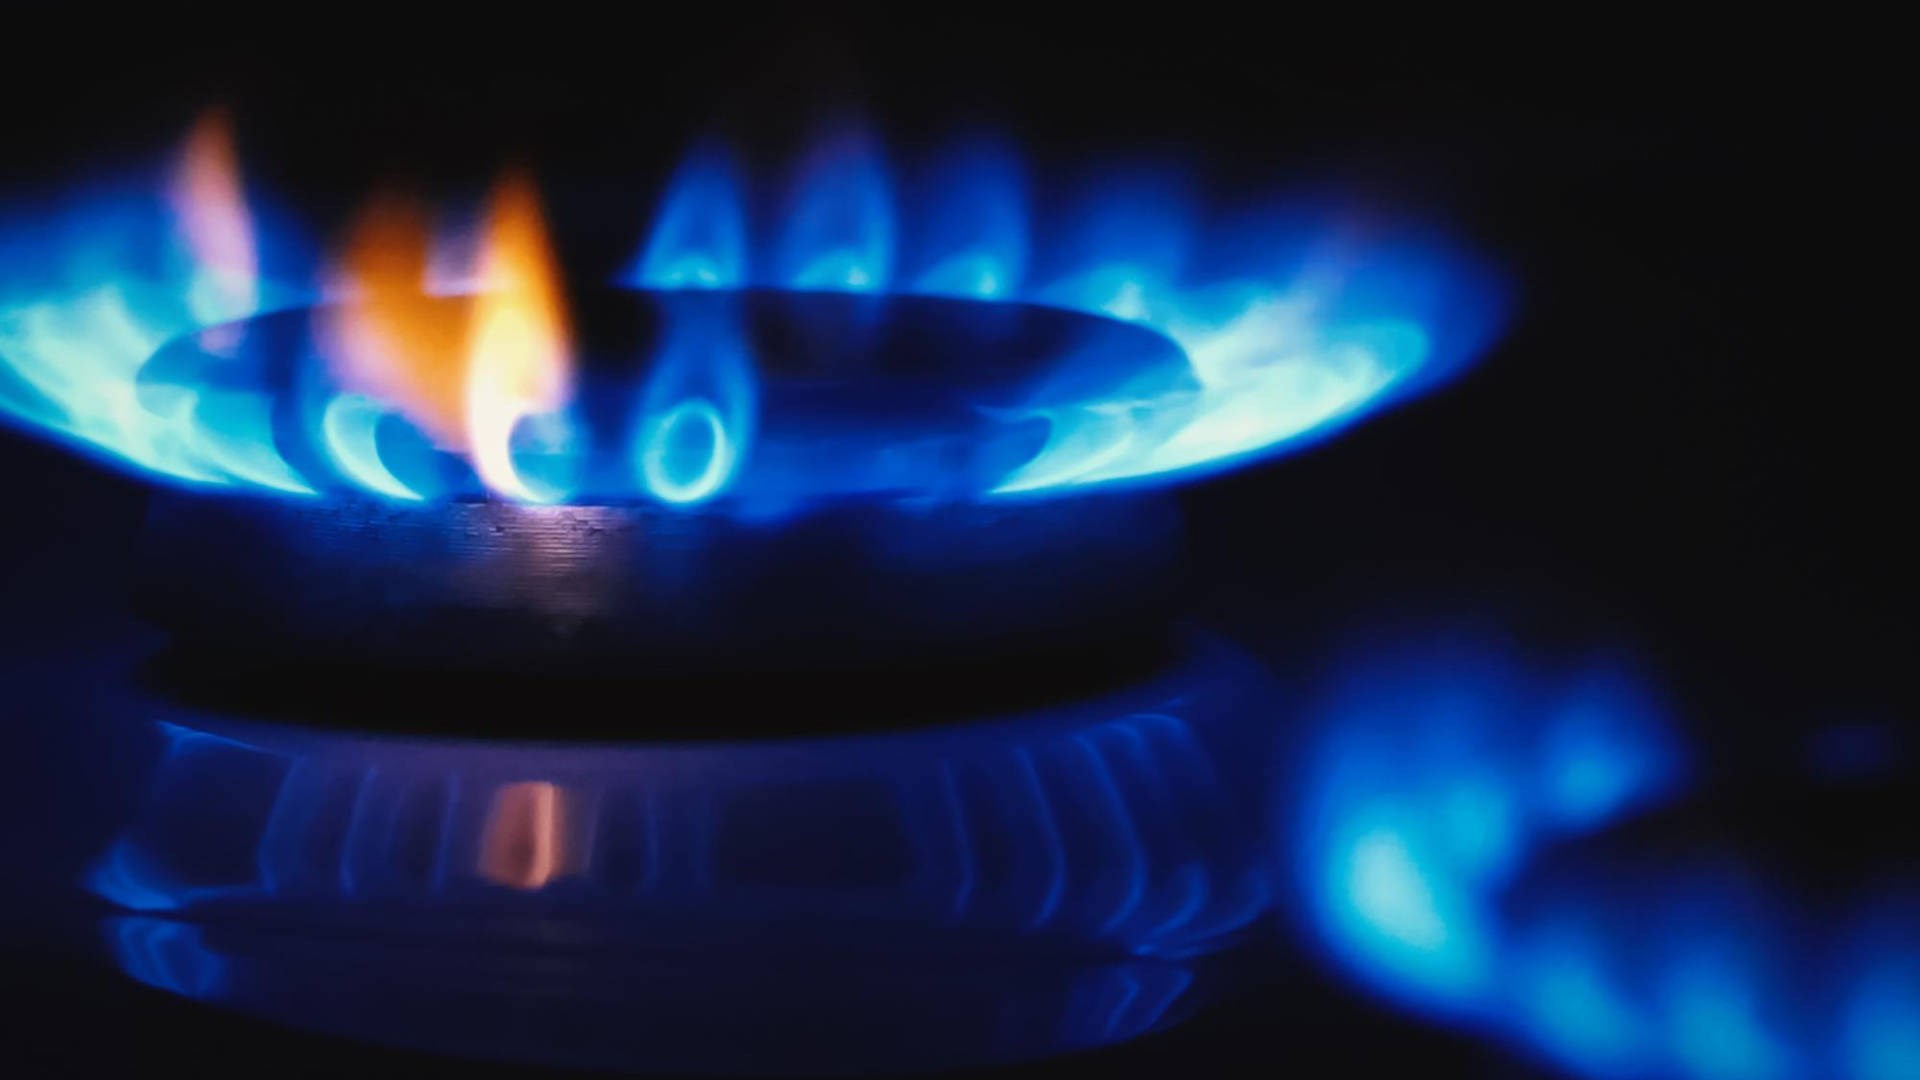 The importance of natural gas safety cannot be overstated.